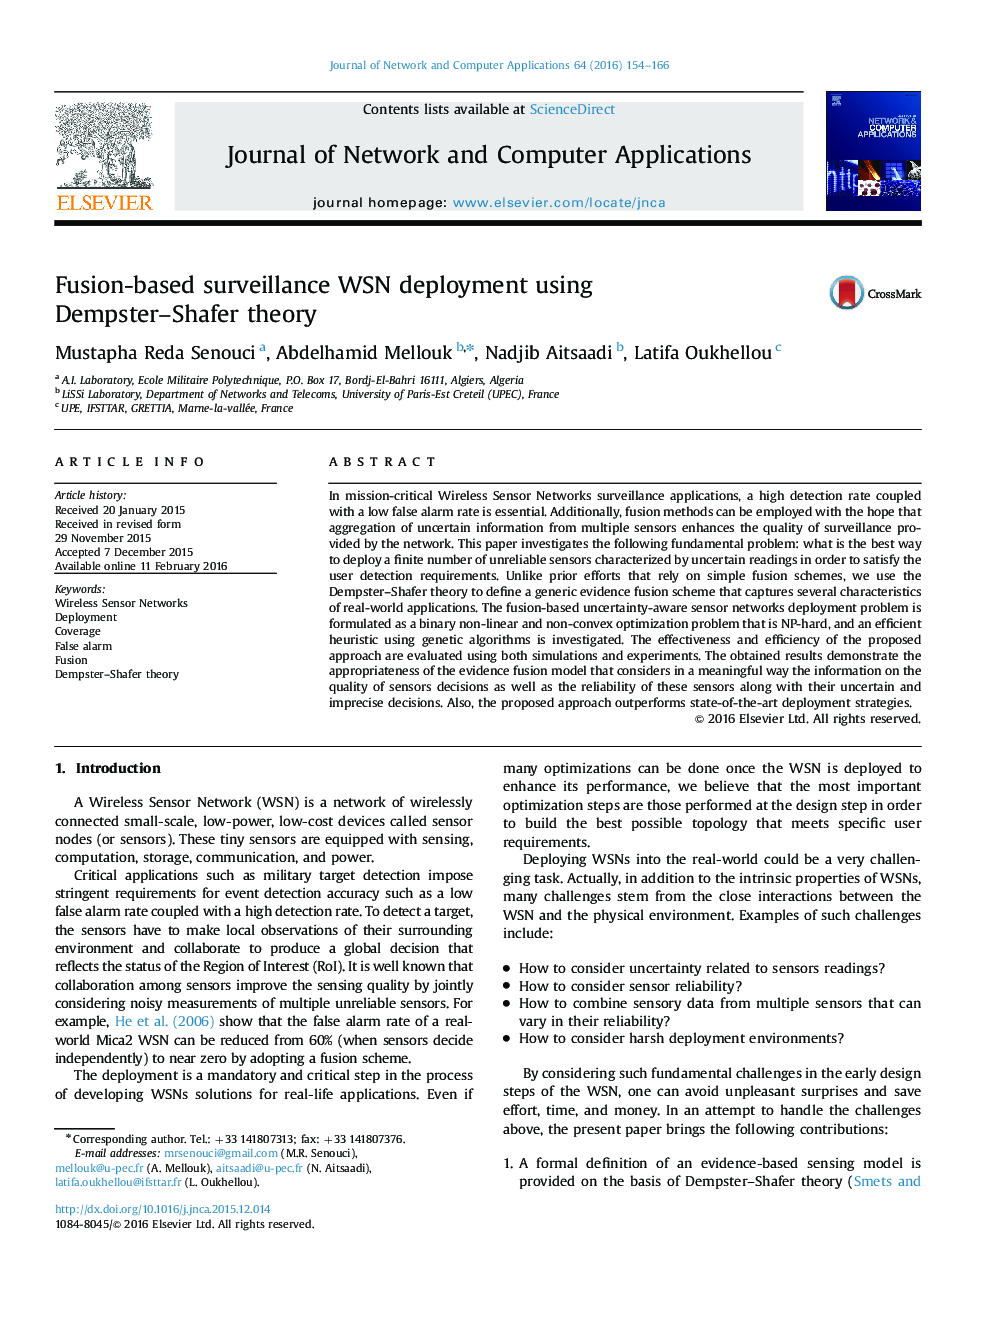 Fusion-based surveillance WSN deployment using Dempster–Shafer theory